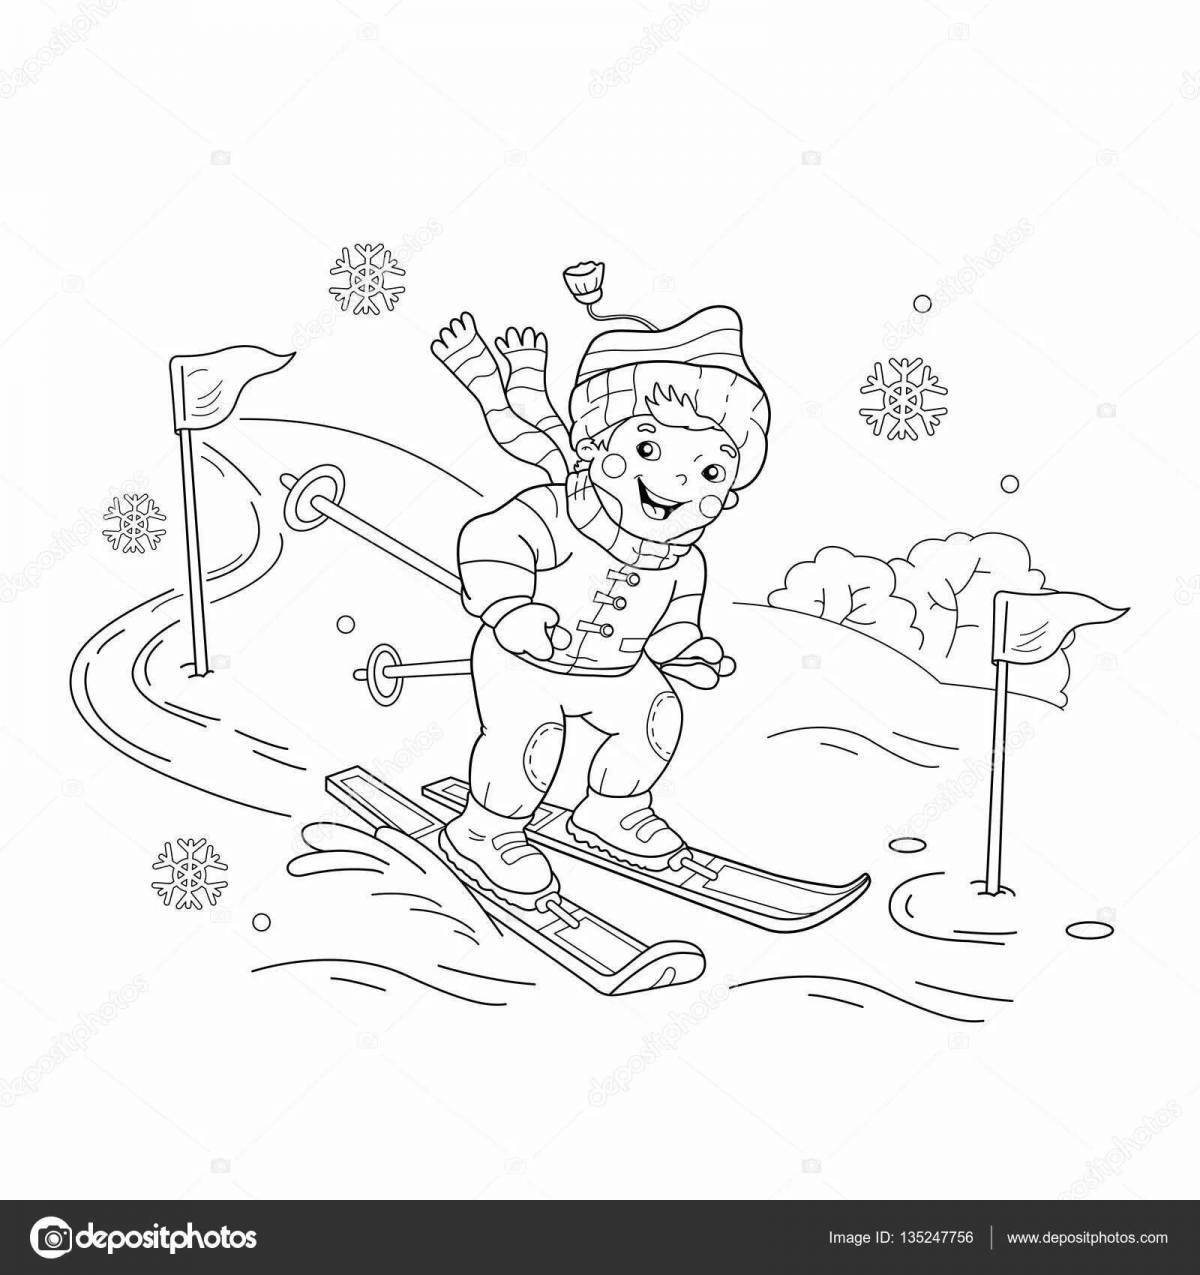 Lovely winter sports coloring page for 4-5 year olds